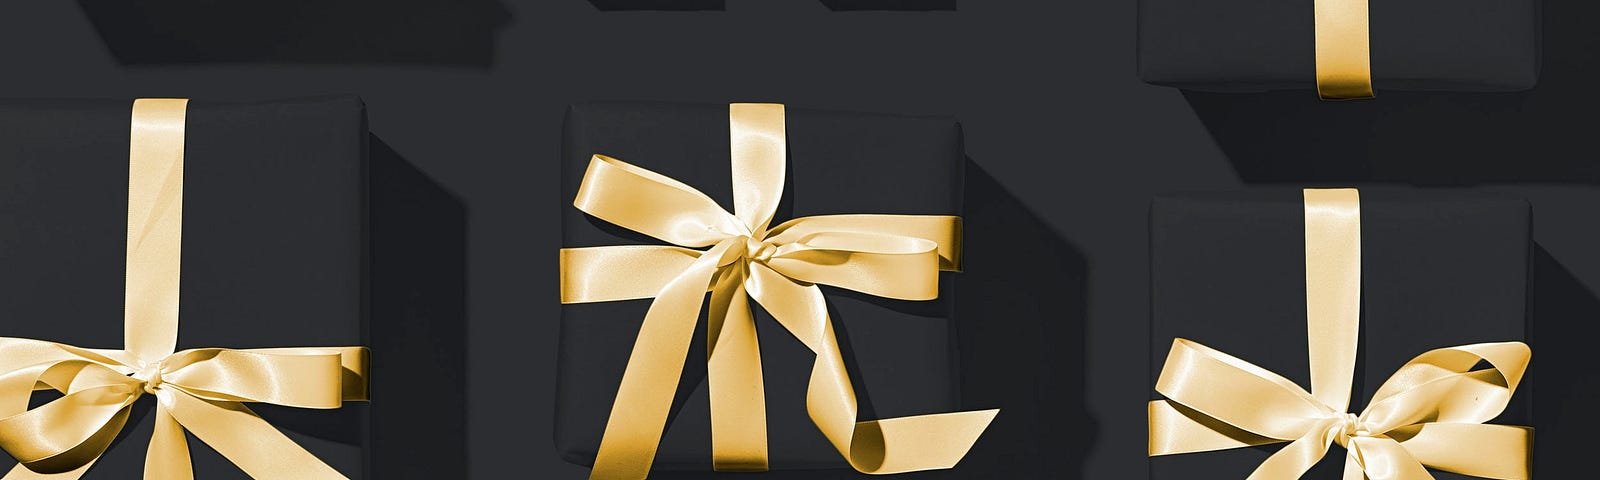 image shows presents wrapped in gold on a black background